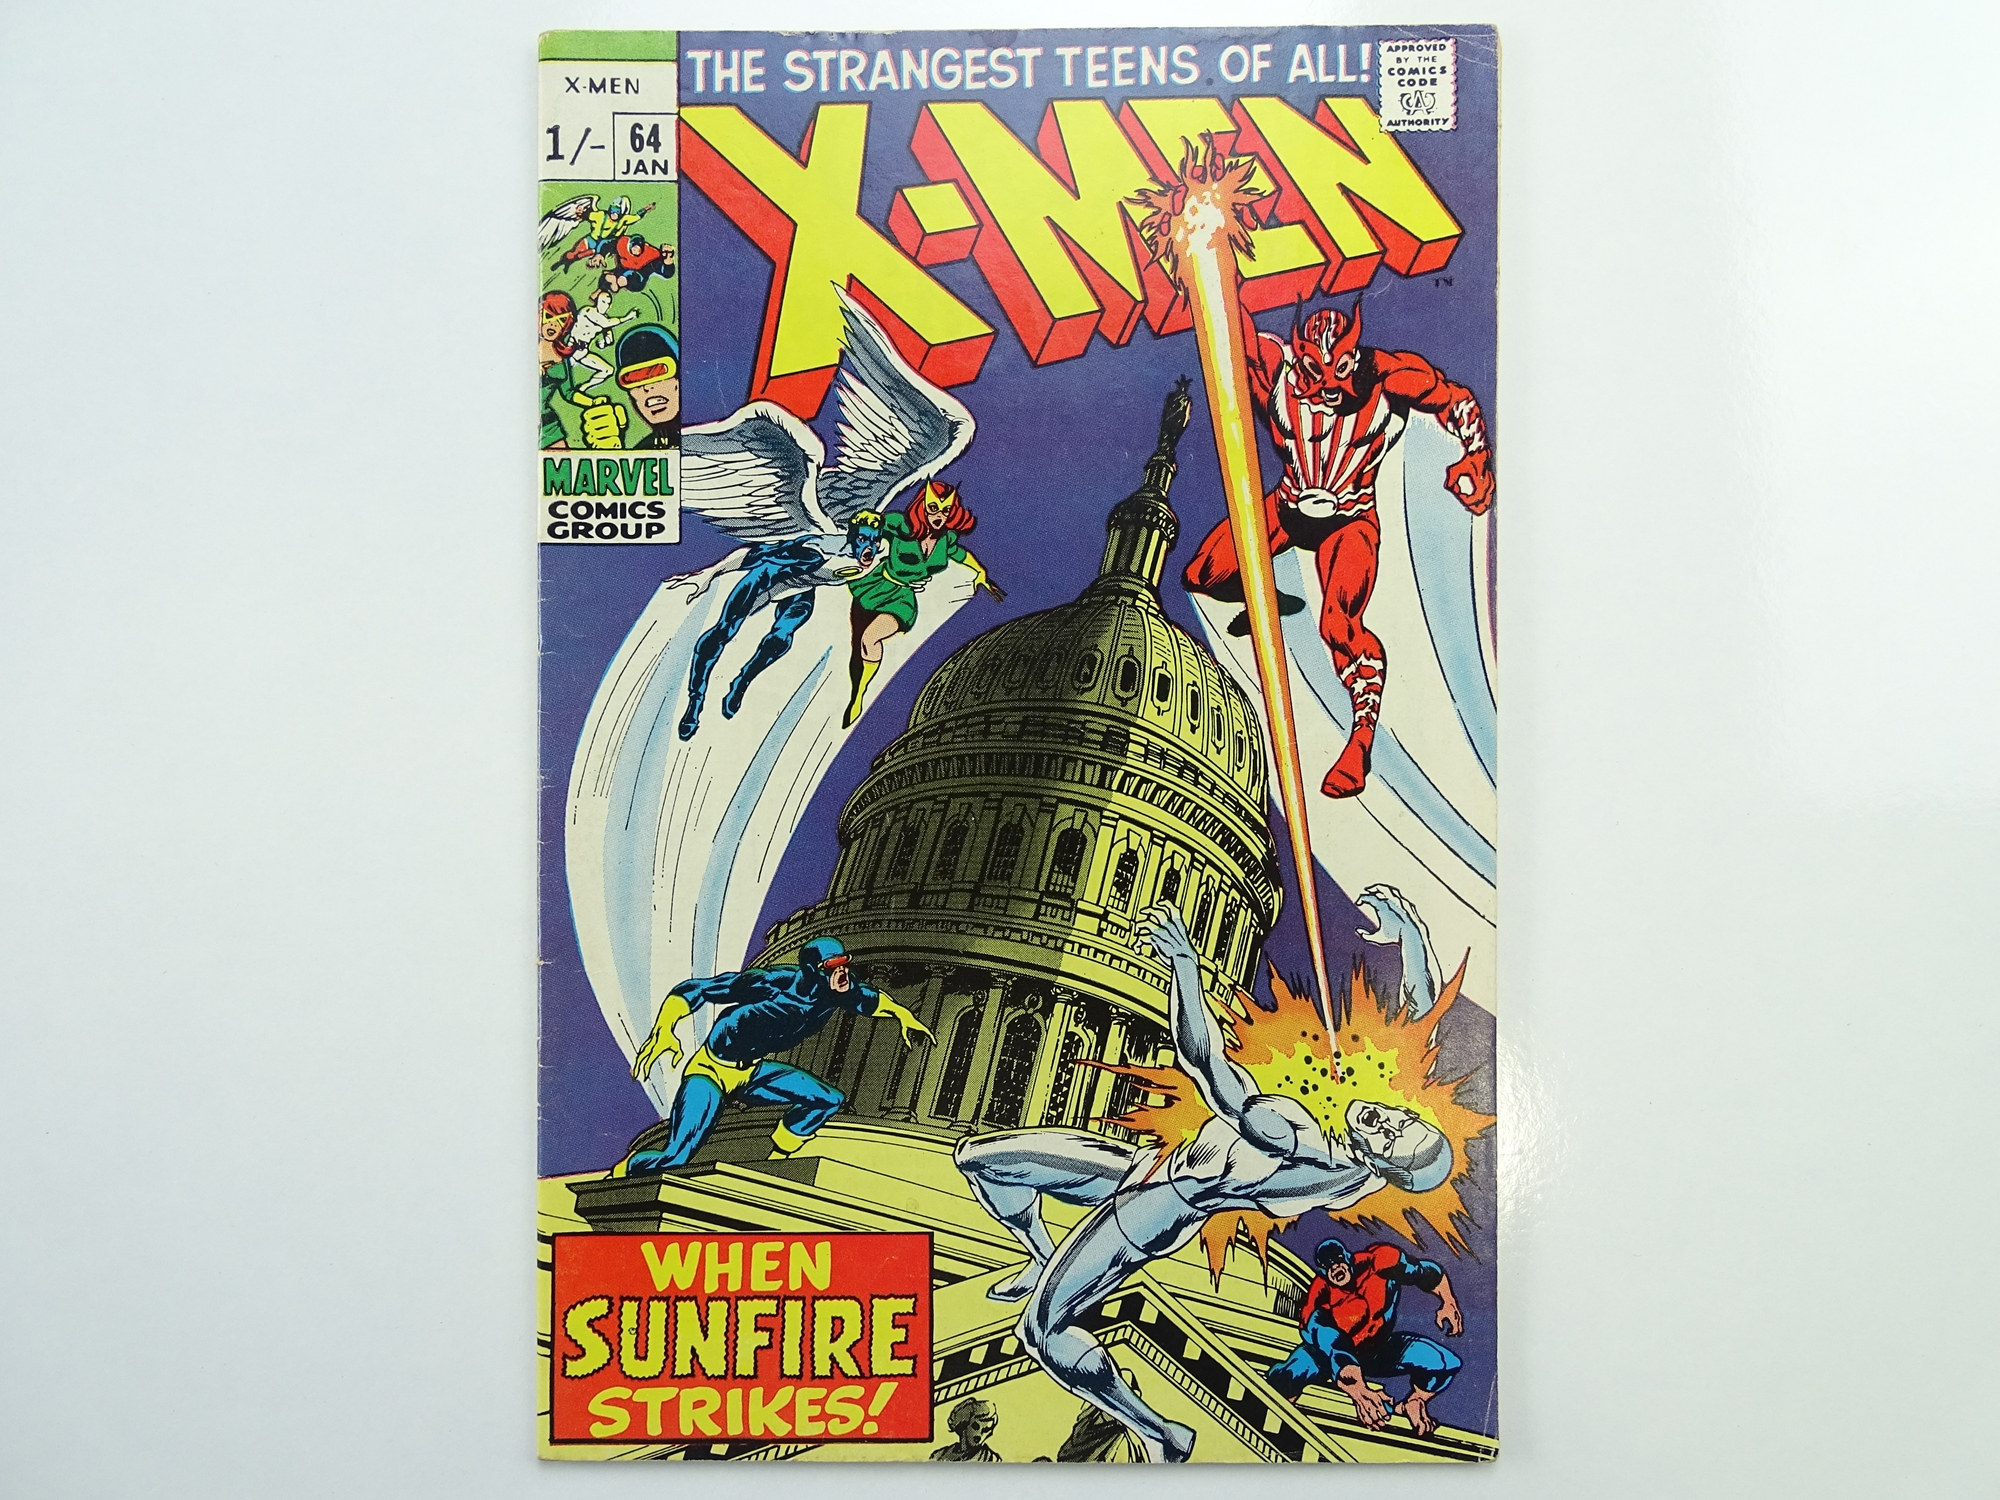 UNCANNY X-MEN # 64 - (1970 - MARVEL - Pence Copy) - First appearance of Sunfire - Tom Palmer cover